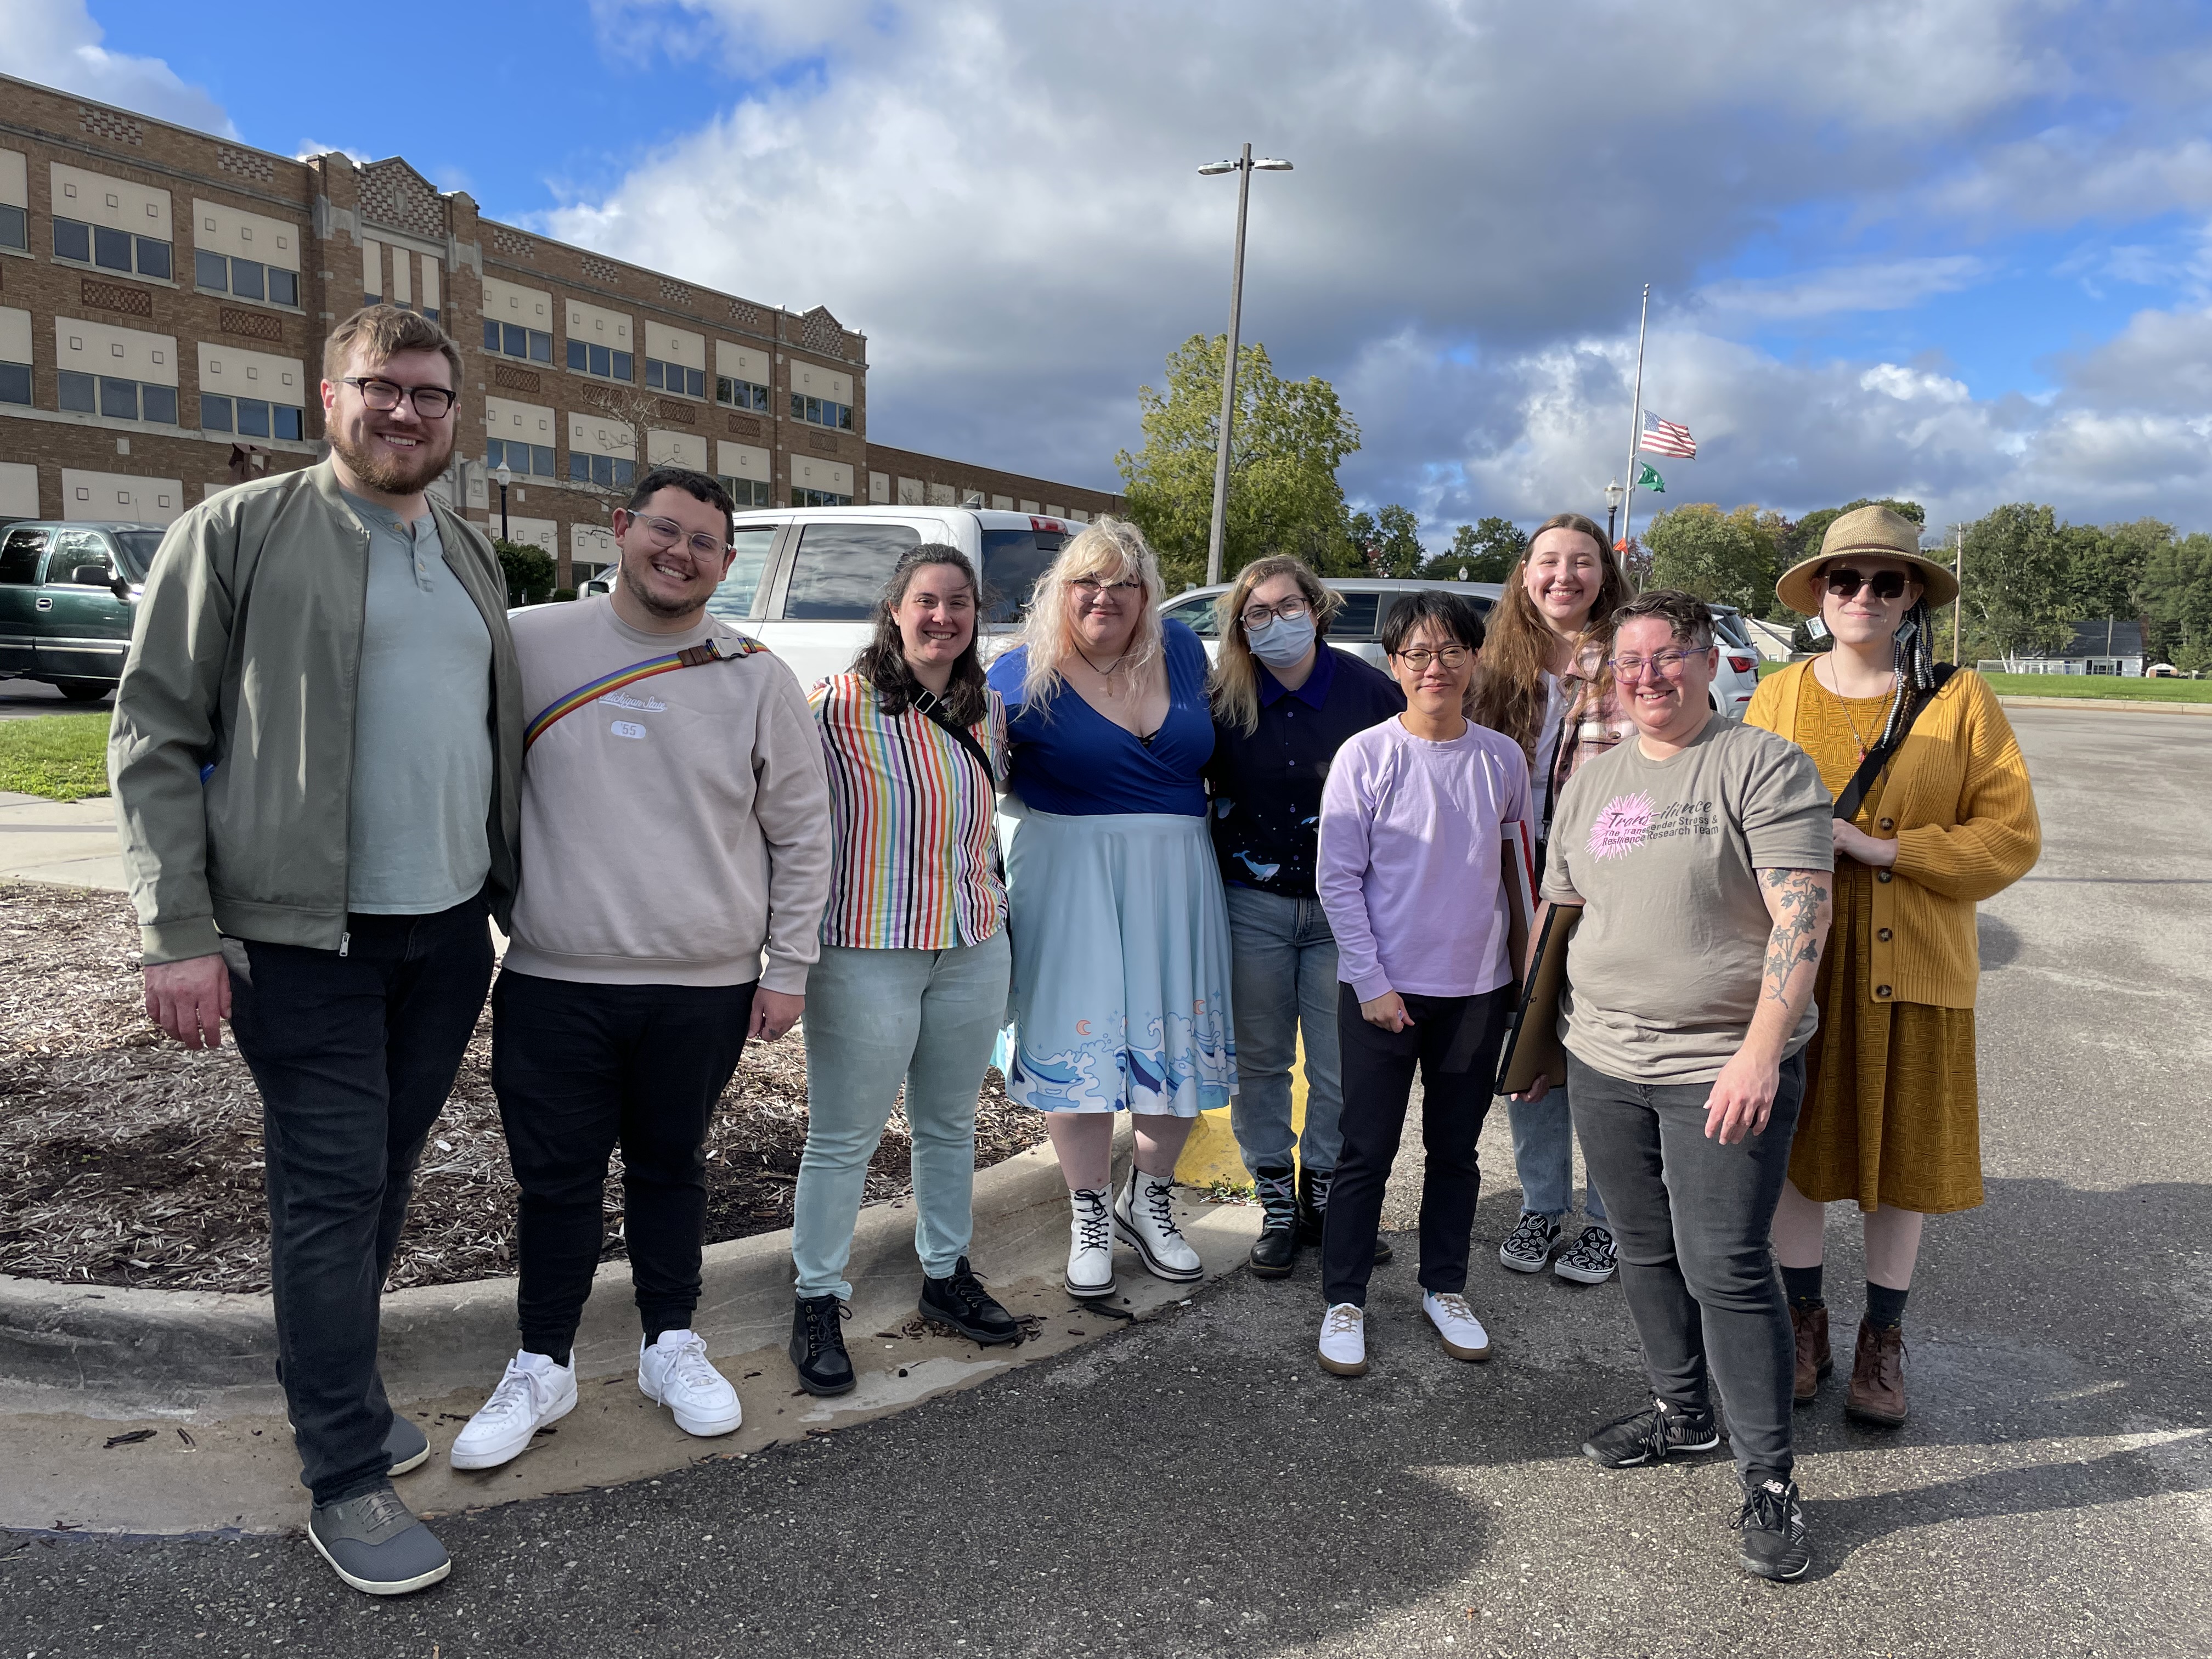 Members of the Trans-ilience research team, board members, and volunteers pause for a group photo during the 'Queer and Trans Joy Celebration' event.